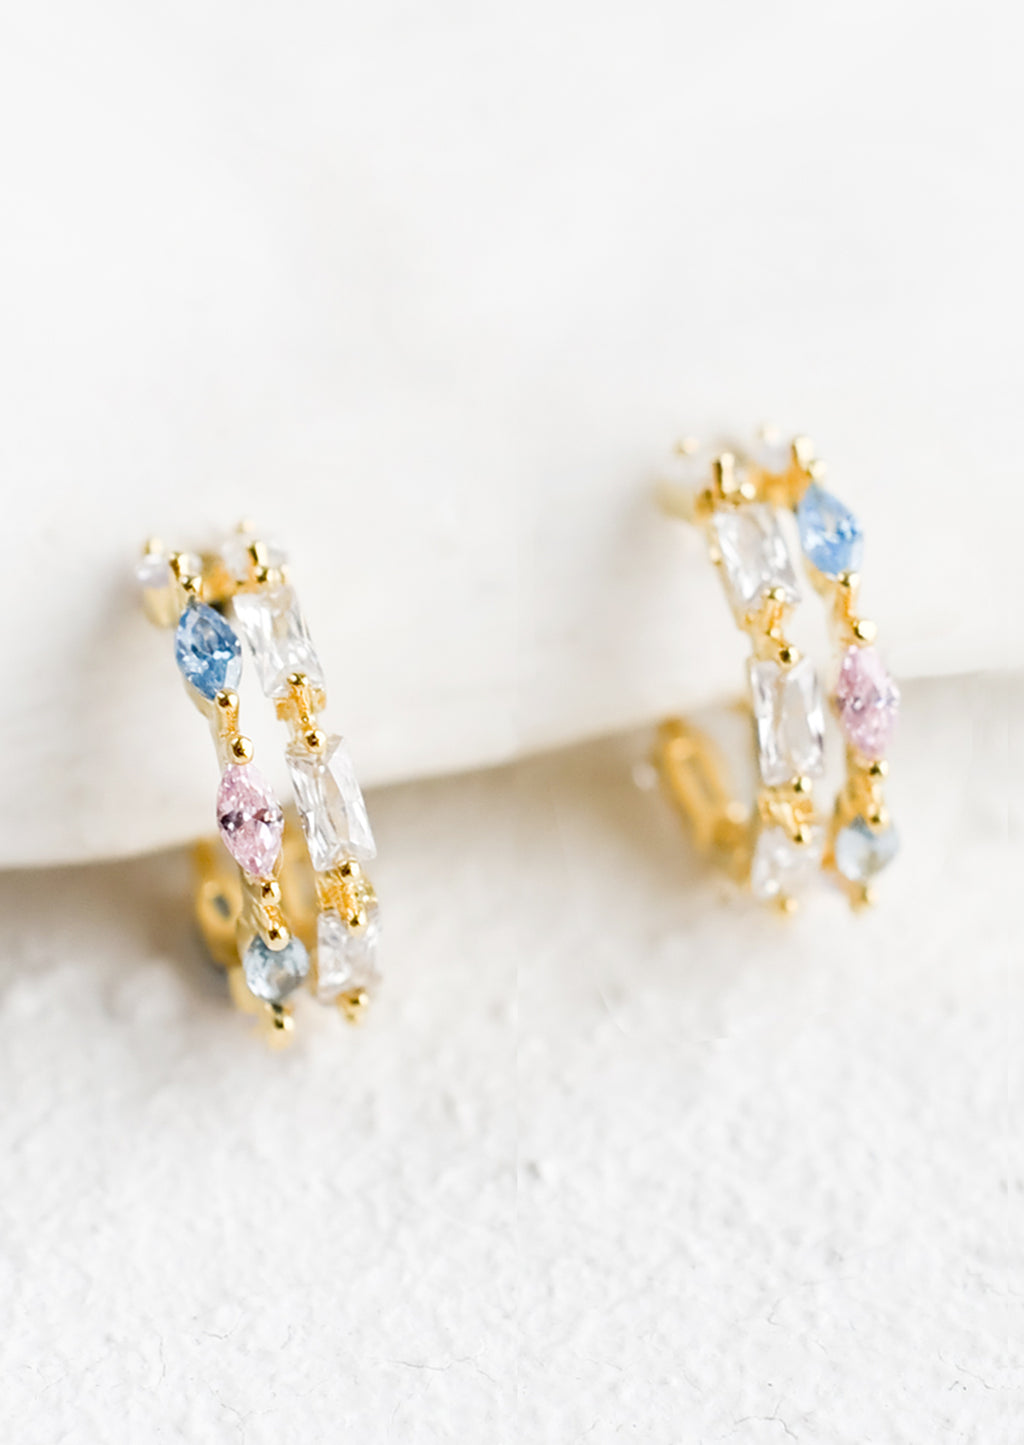 2: A pair of small gold huggie hoop earrings with clear, pink and blue crystals.